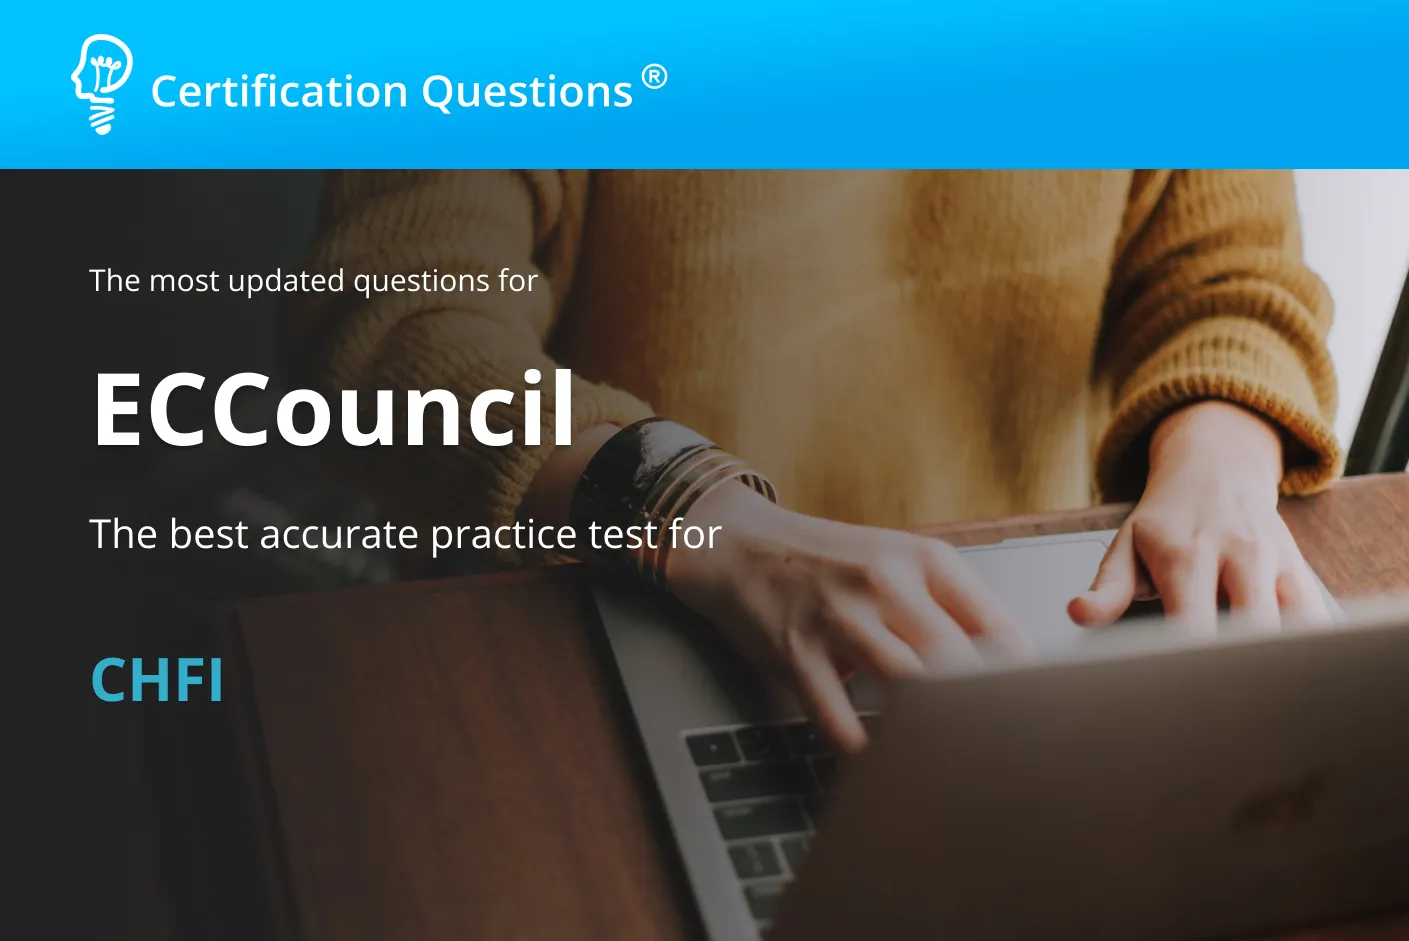 Here is the image for the EC Council CHFI certification questions in the United States of America.